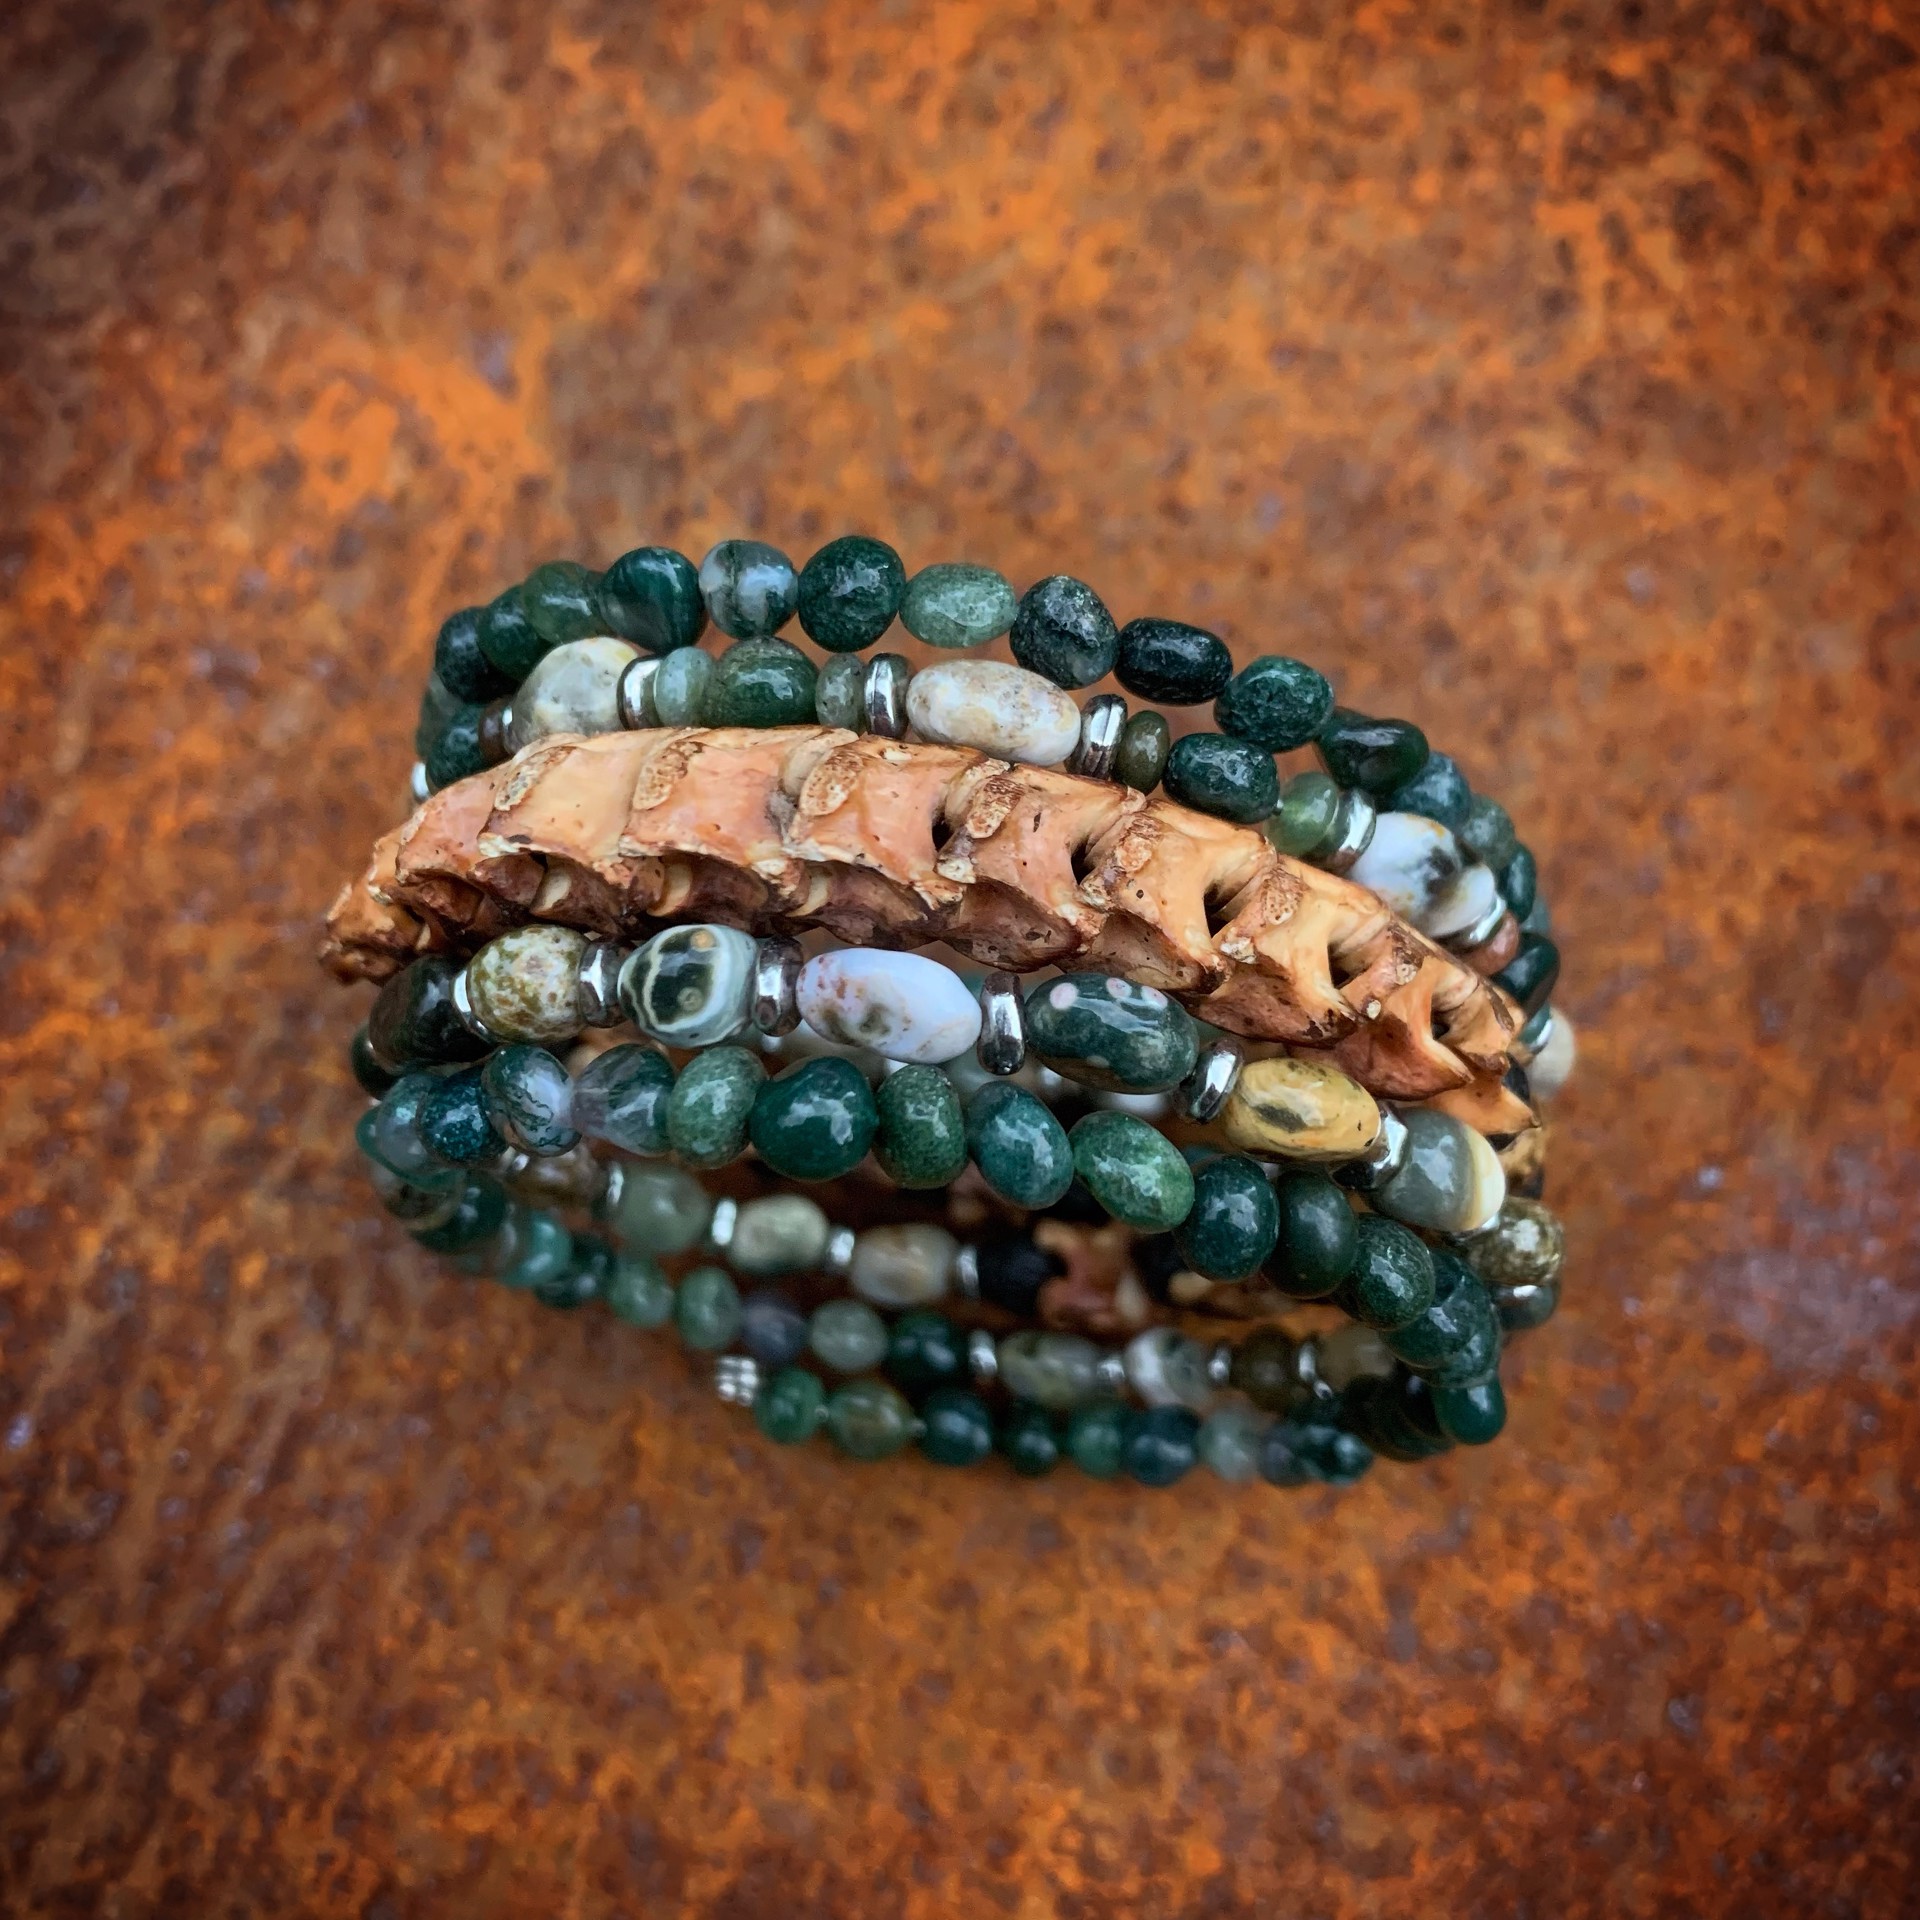 K621 Green Jasper with African Snake Bones by Kelly Ormsby